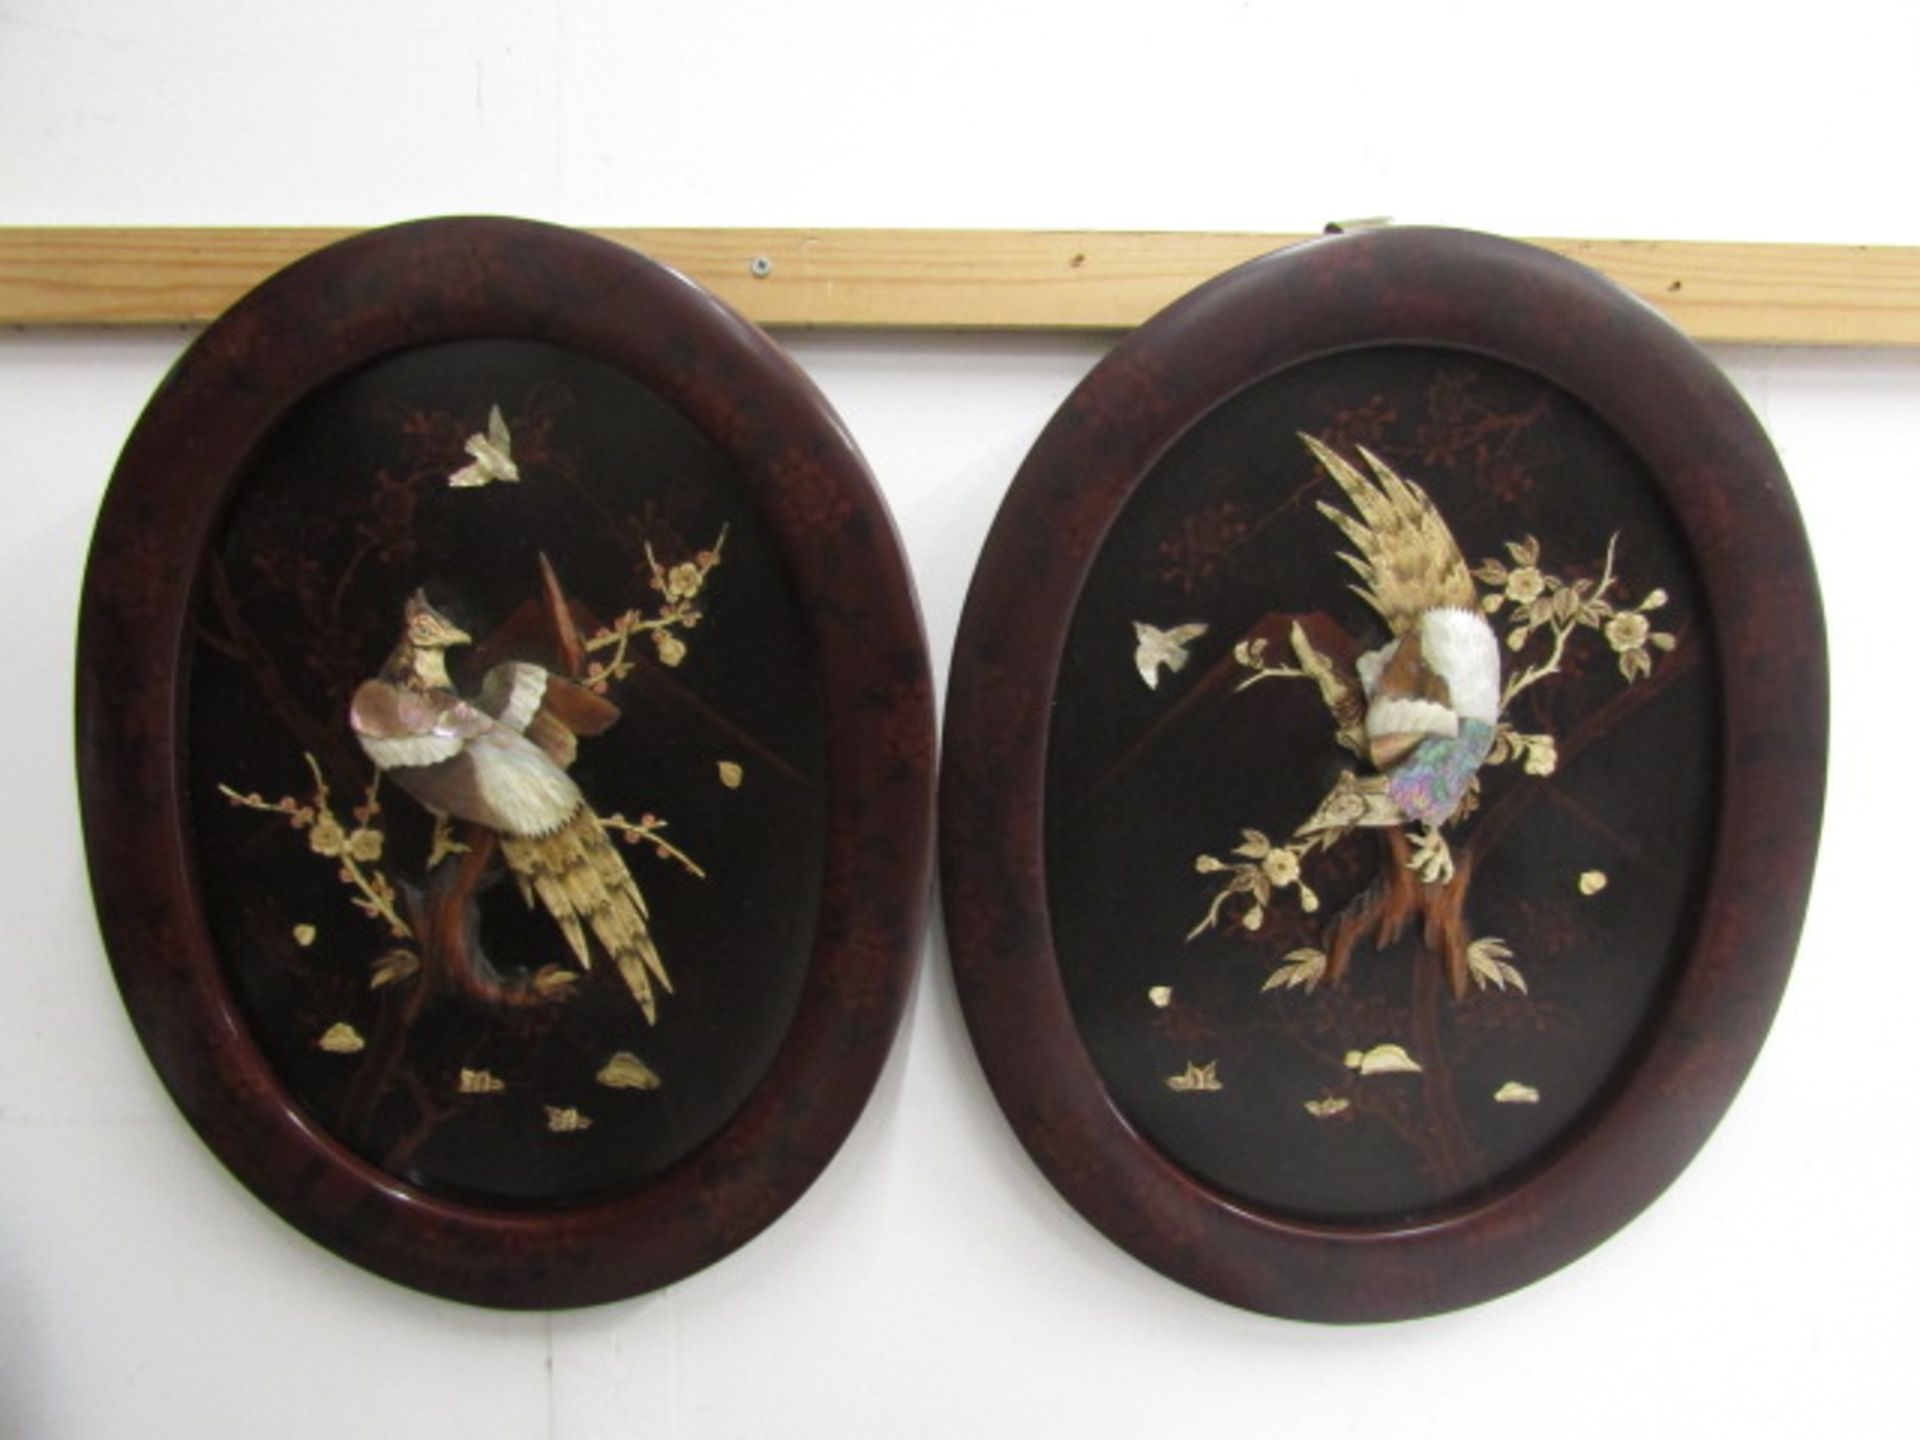 2 Shibayama plaques of birds in mother of pearl 3D design with lacquered style frames 54cmH